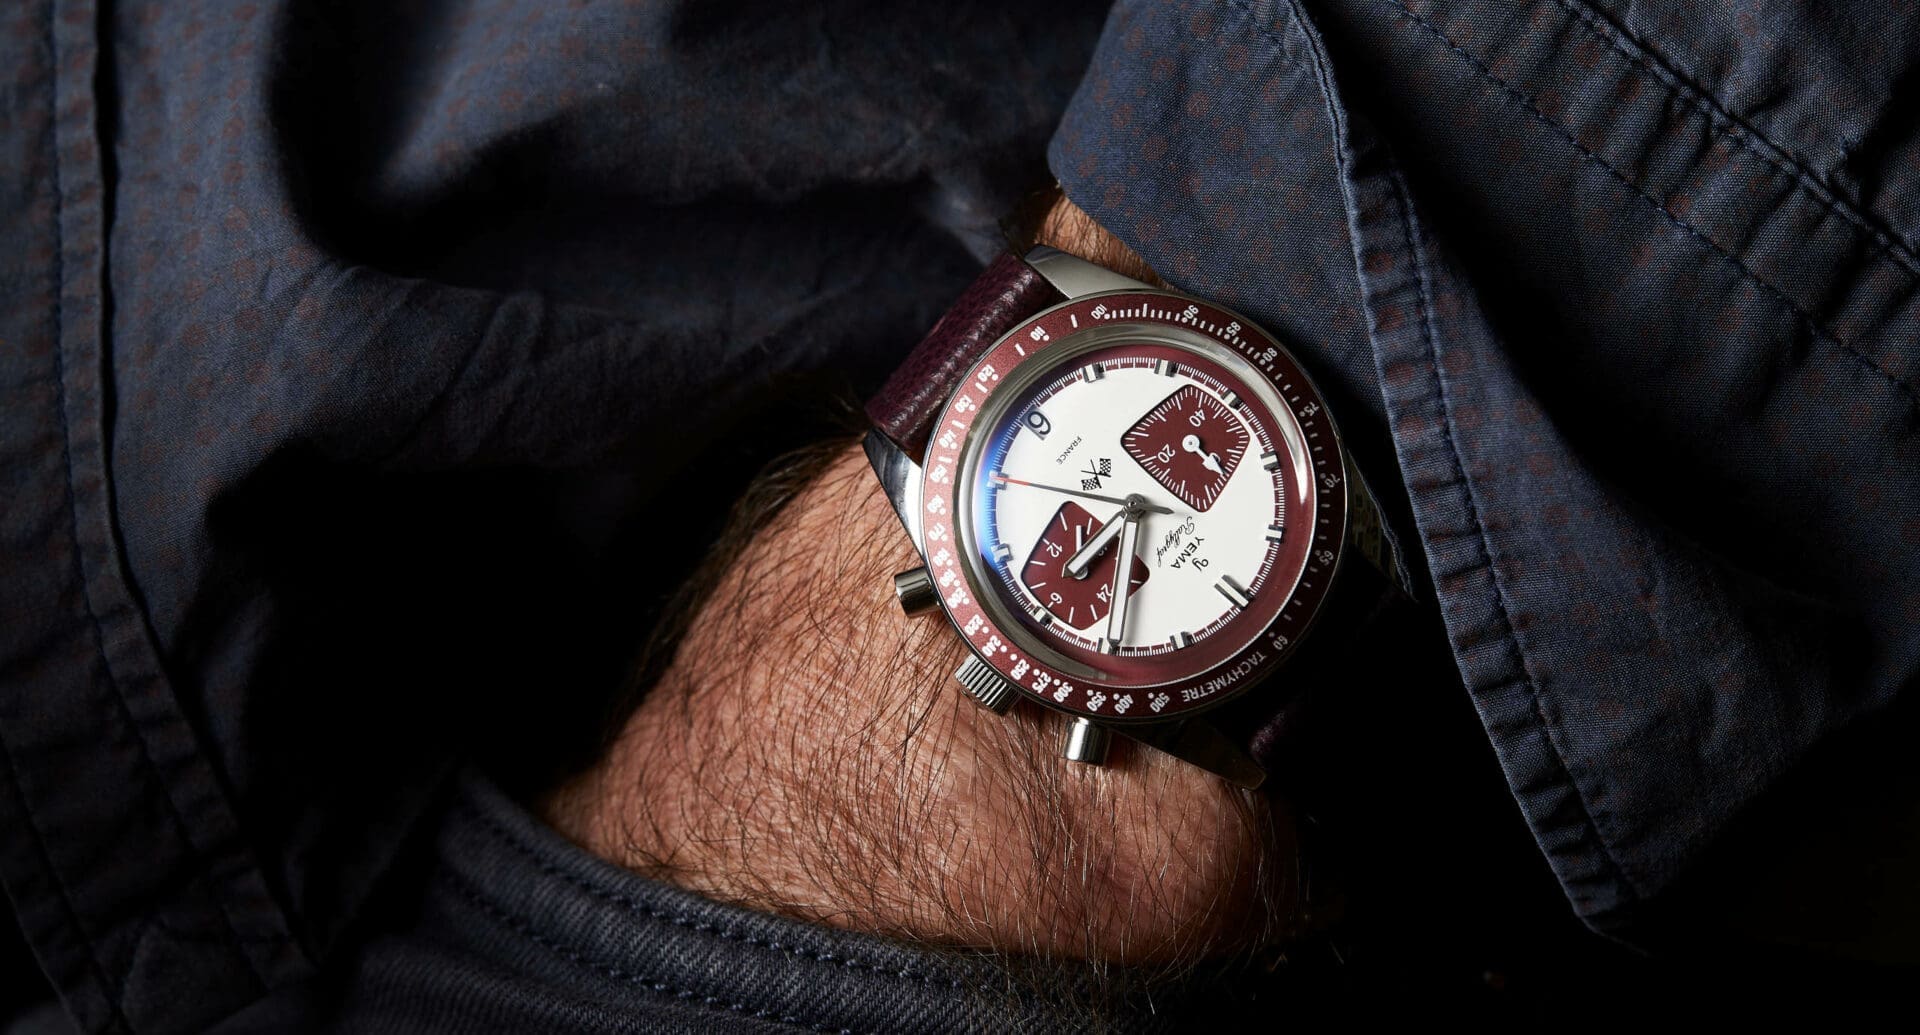 HANDS-ON: The Yema Rallygraf Meca-Quartz is one of the best budget racing watches around